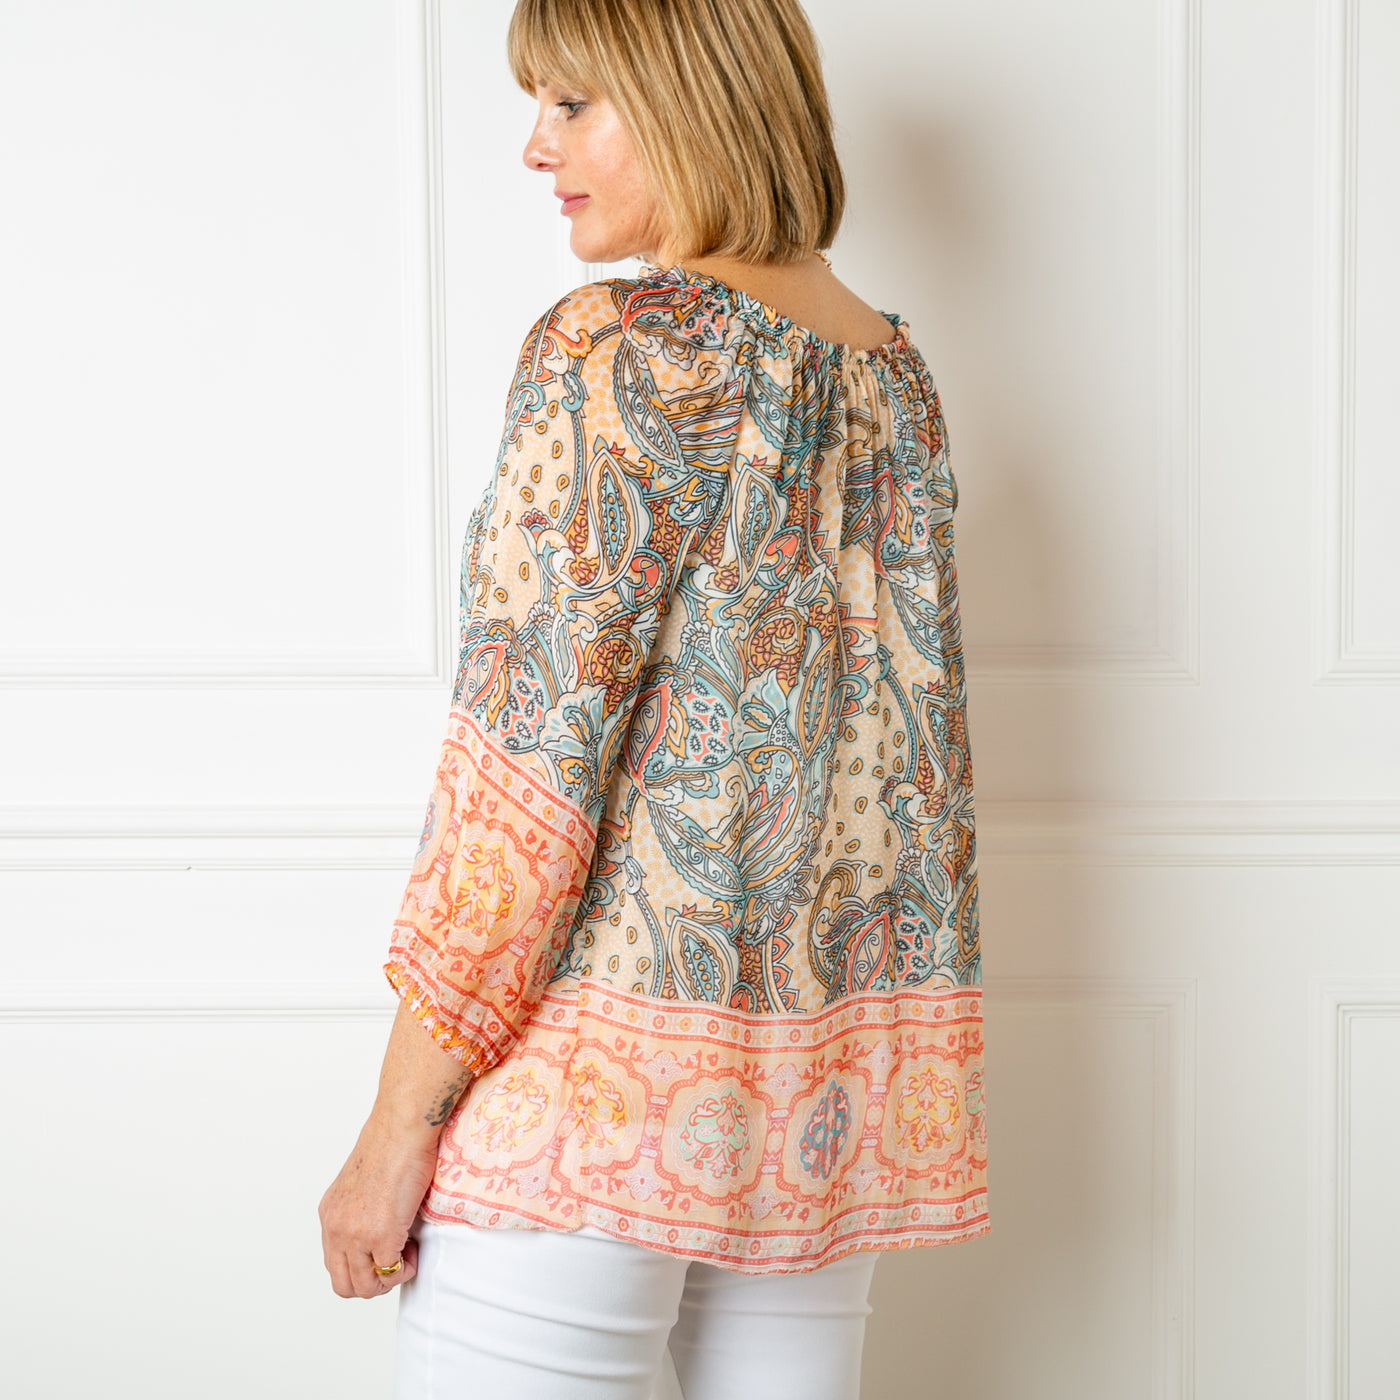 The cream Silk Blend Paisley Top with a round neckline with elastic and gathering around the neckline